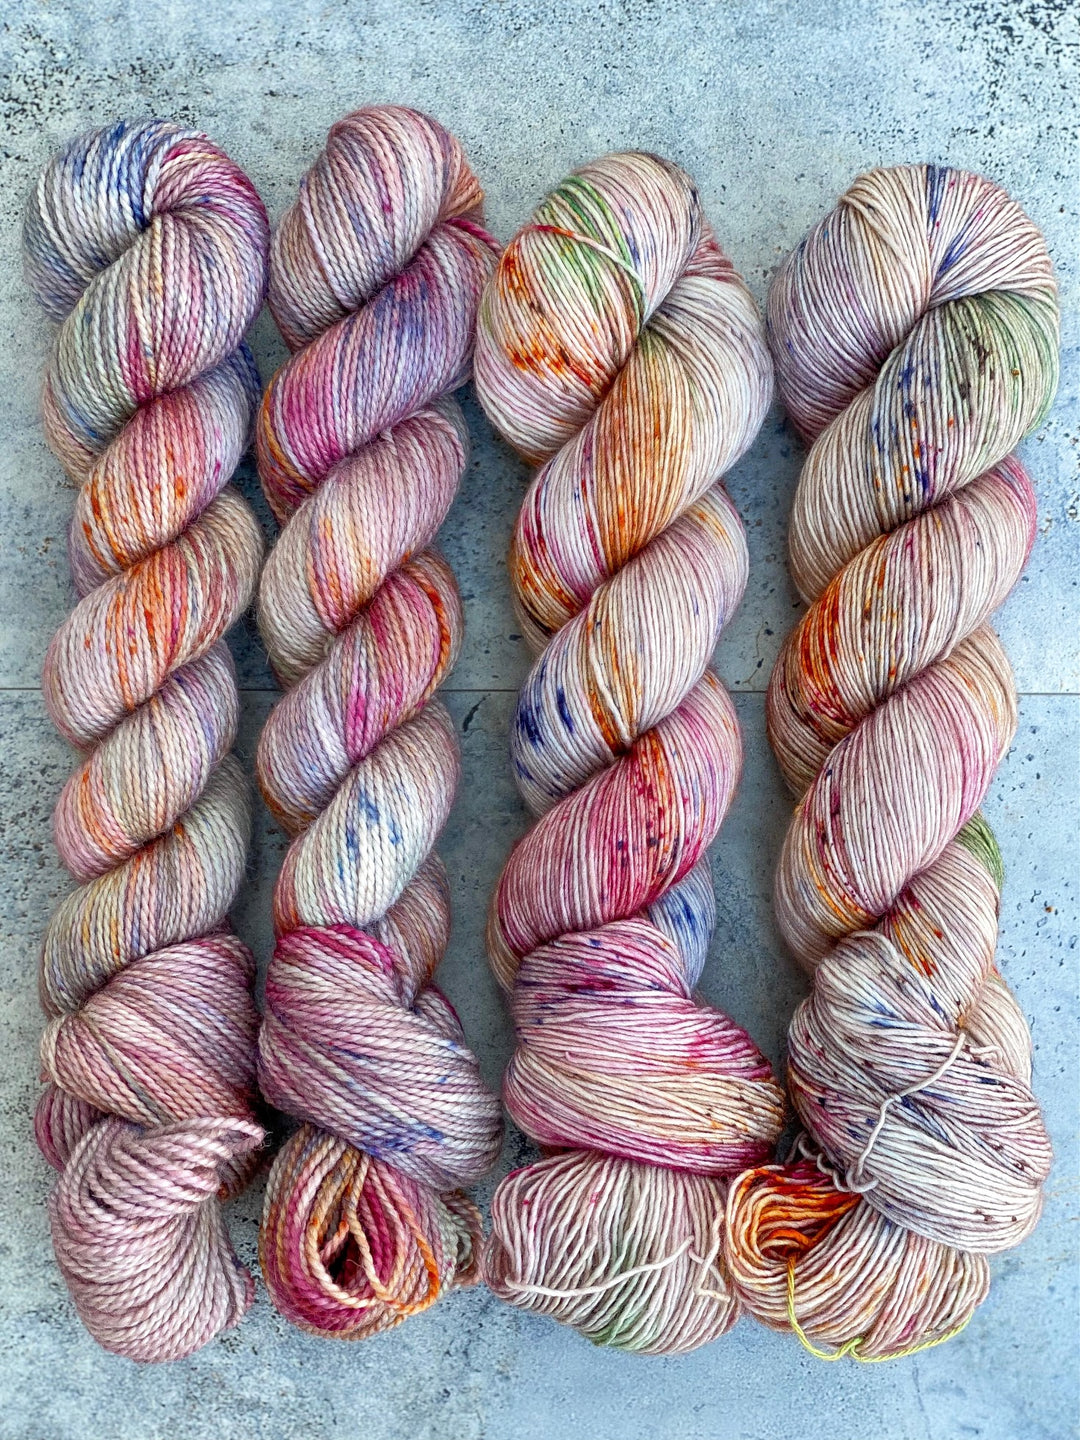 Pink, green and gold speckled yarn.